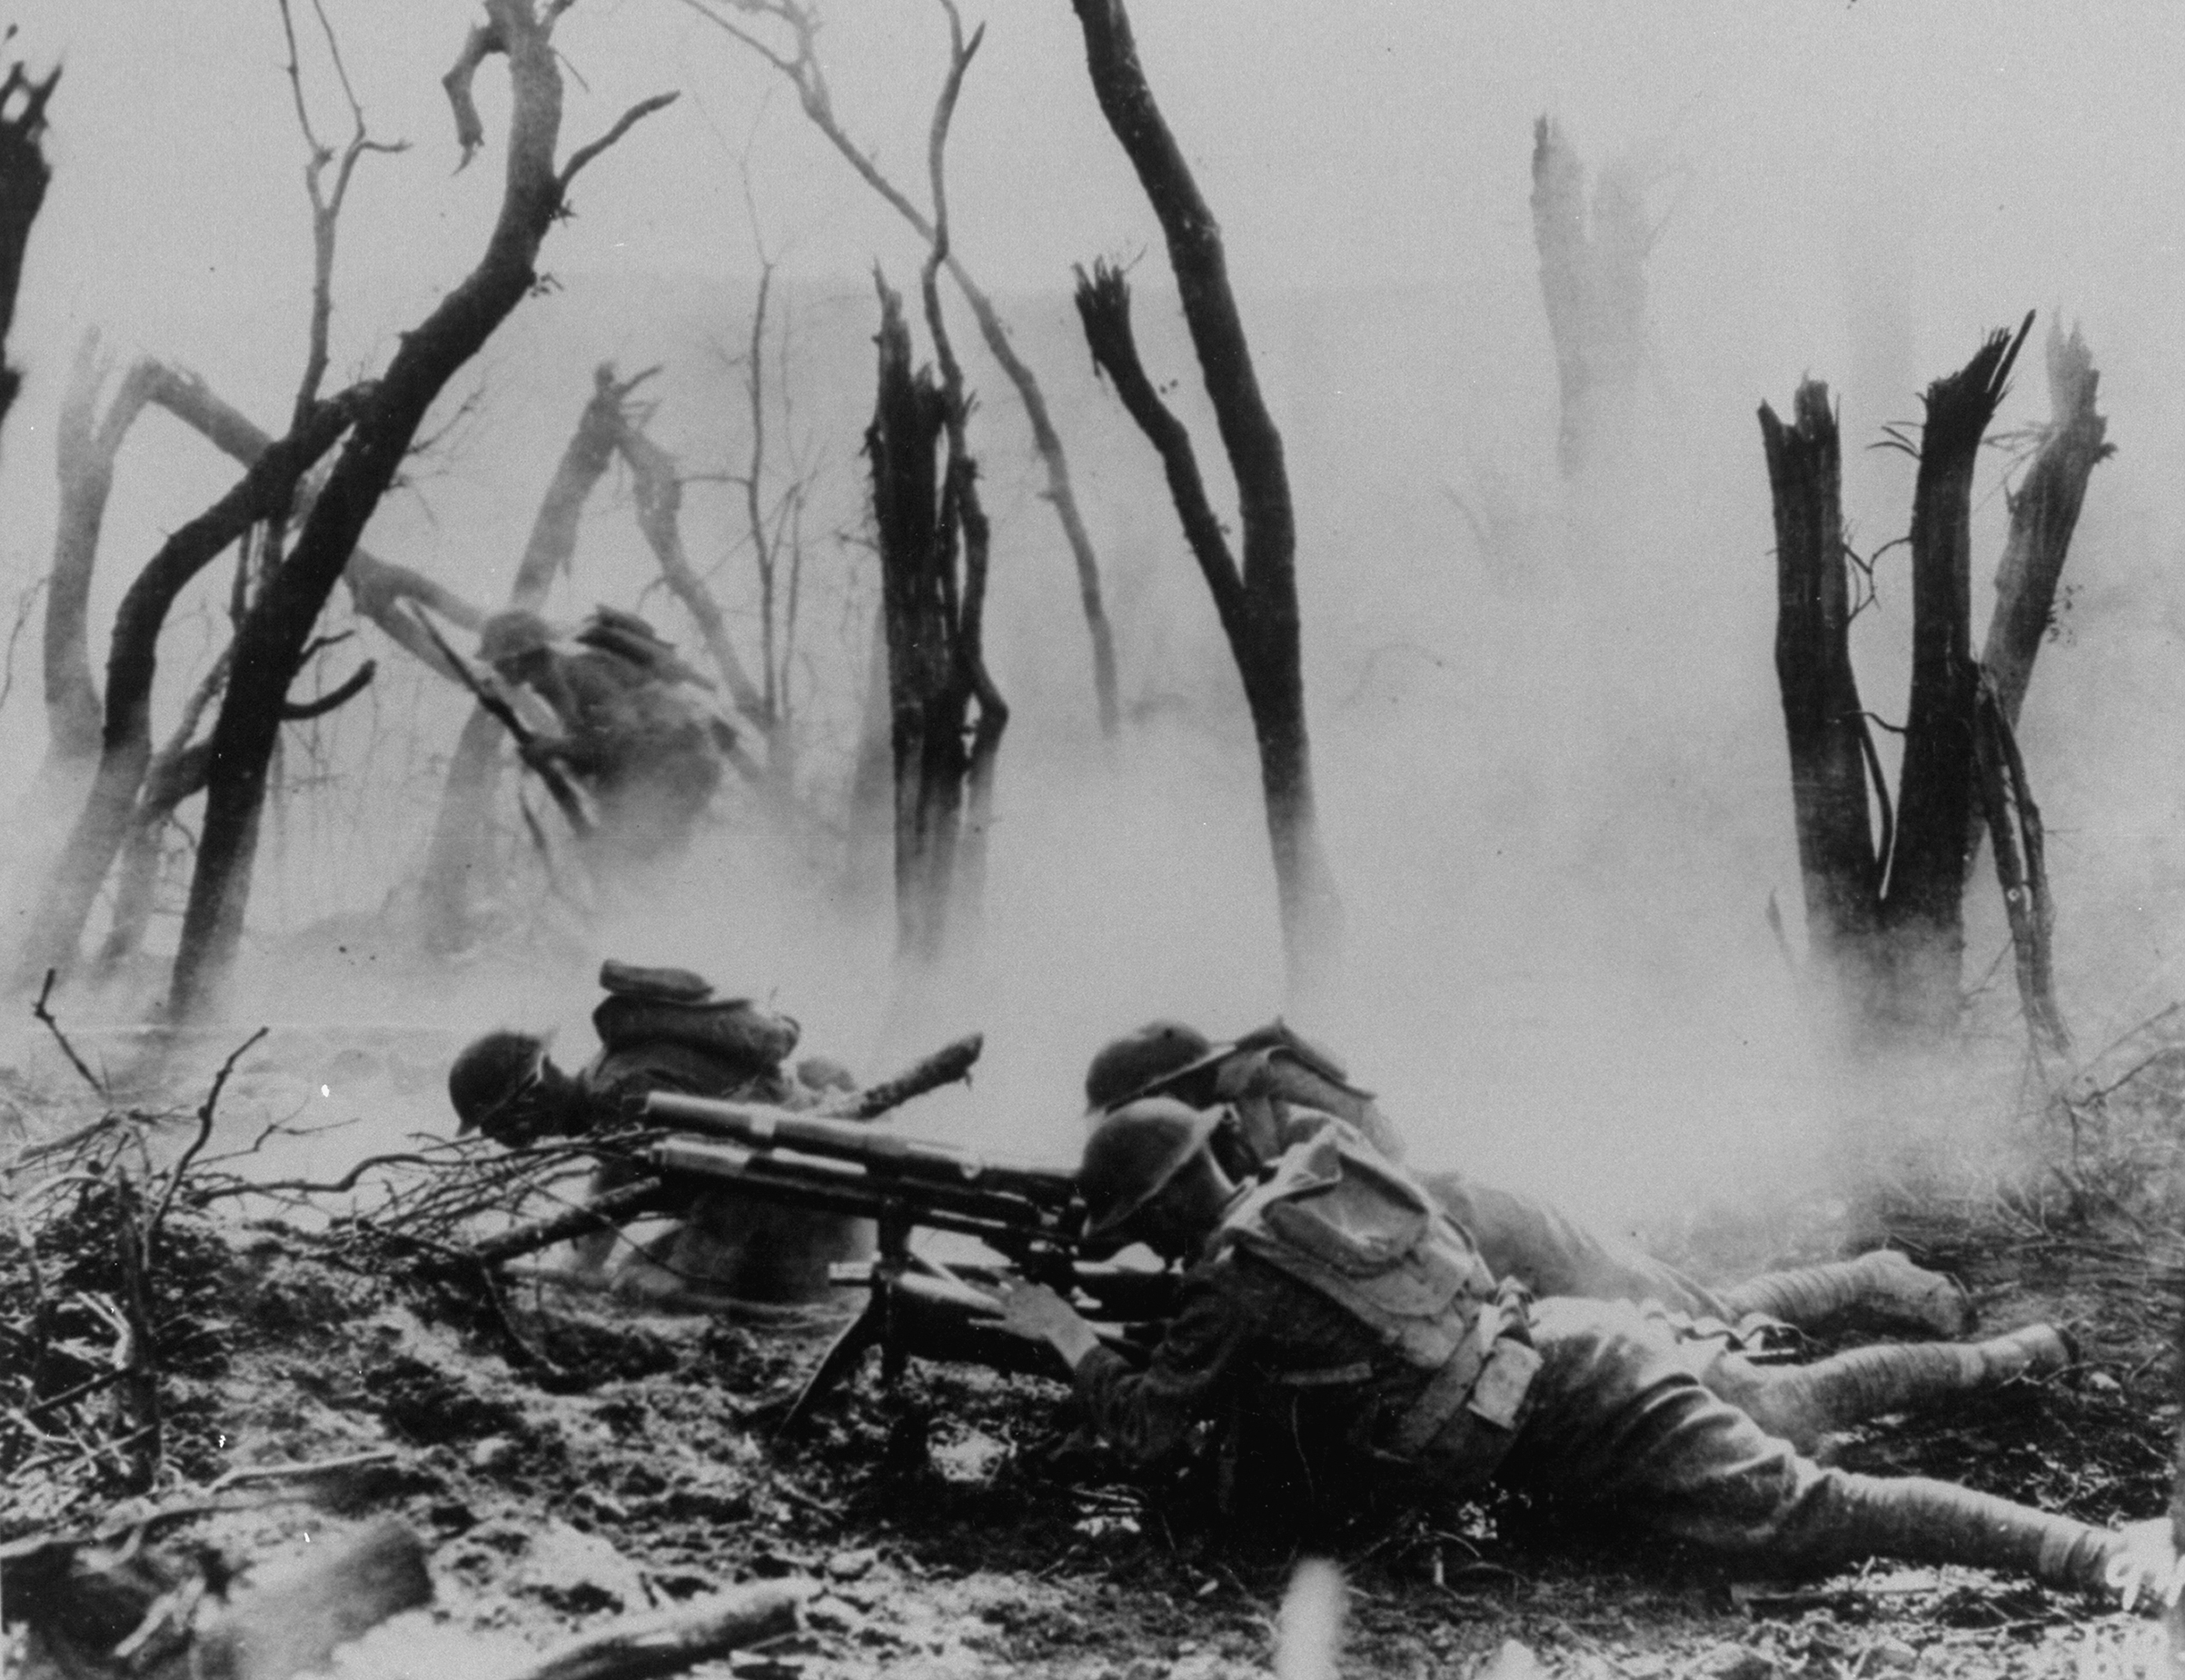 U.S. soldiers of the 23rd Infantry, 2nd Division, firing a 37mm machine gun at a German position in the Argonne Forest, during the Meuse-Argonne offensive in 1918. (U.S. Army Signal Corps/The LIFE Picture Collection/Getty Images)